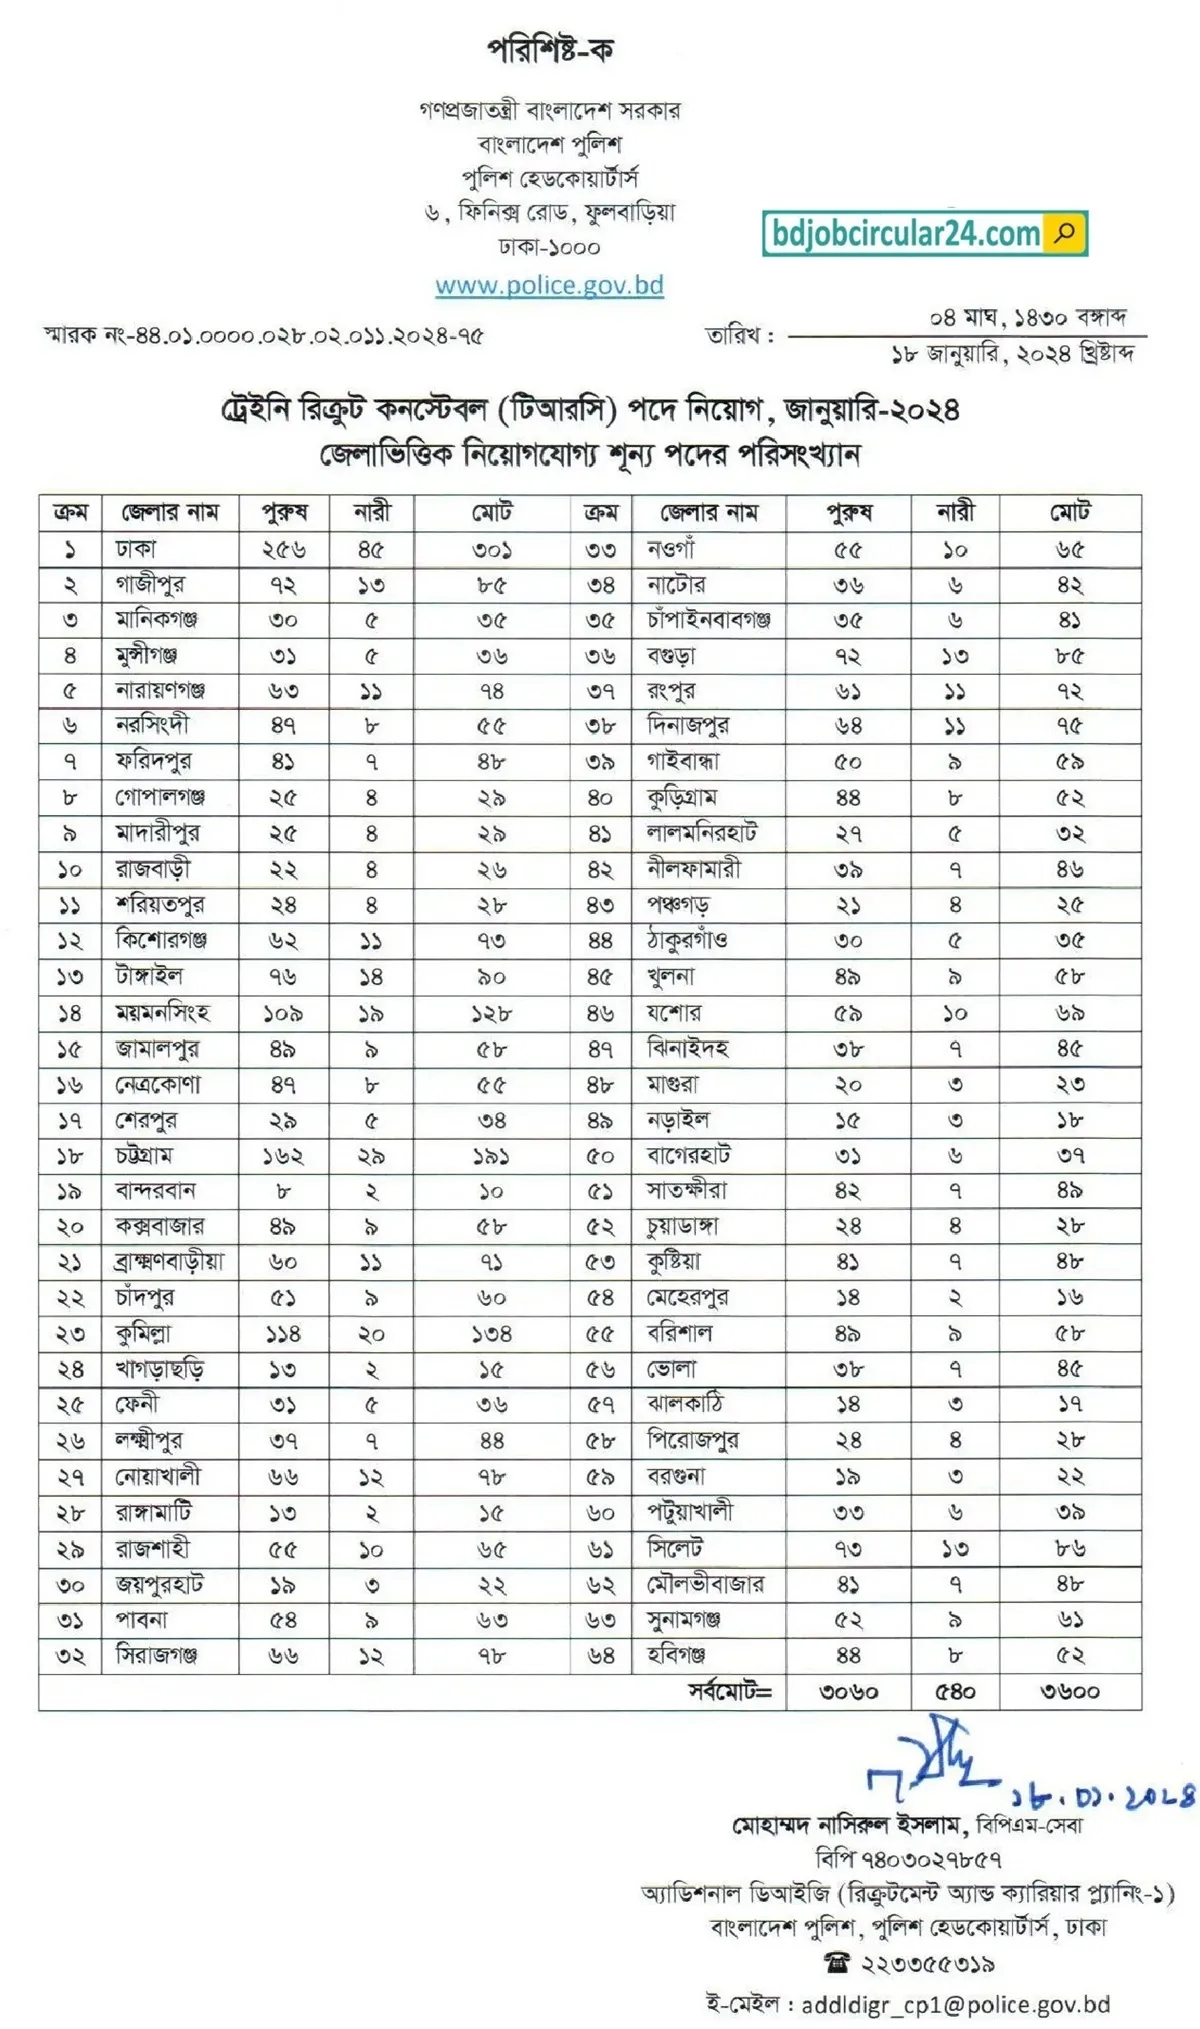 District Wise Vacancy Details of Police Constable Job Image